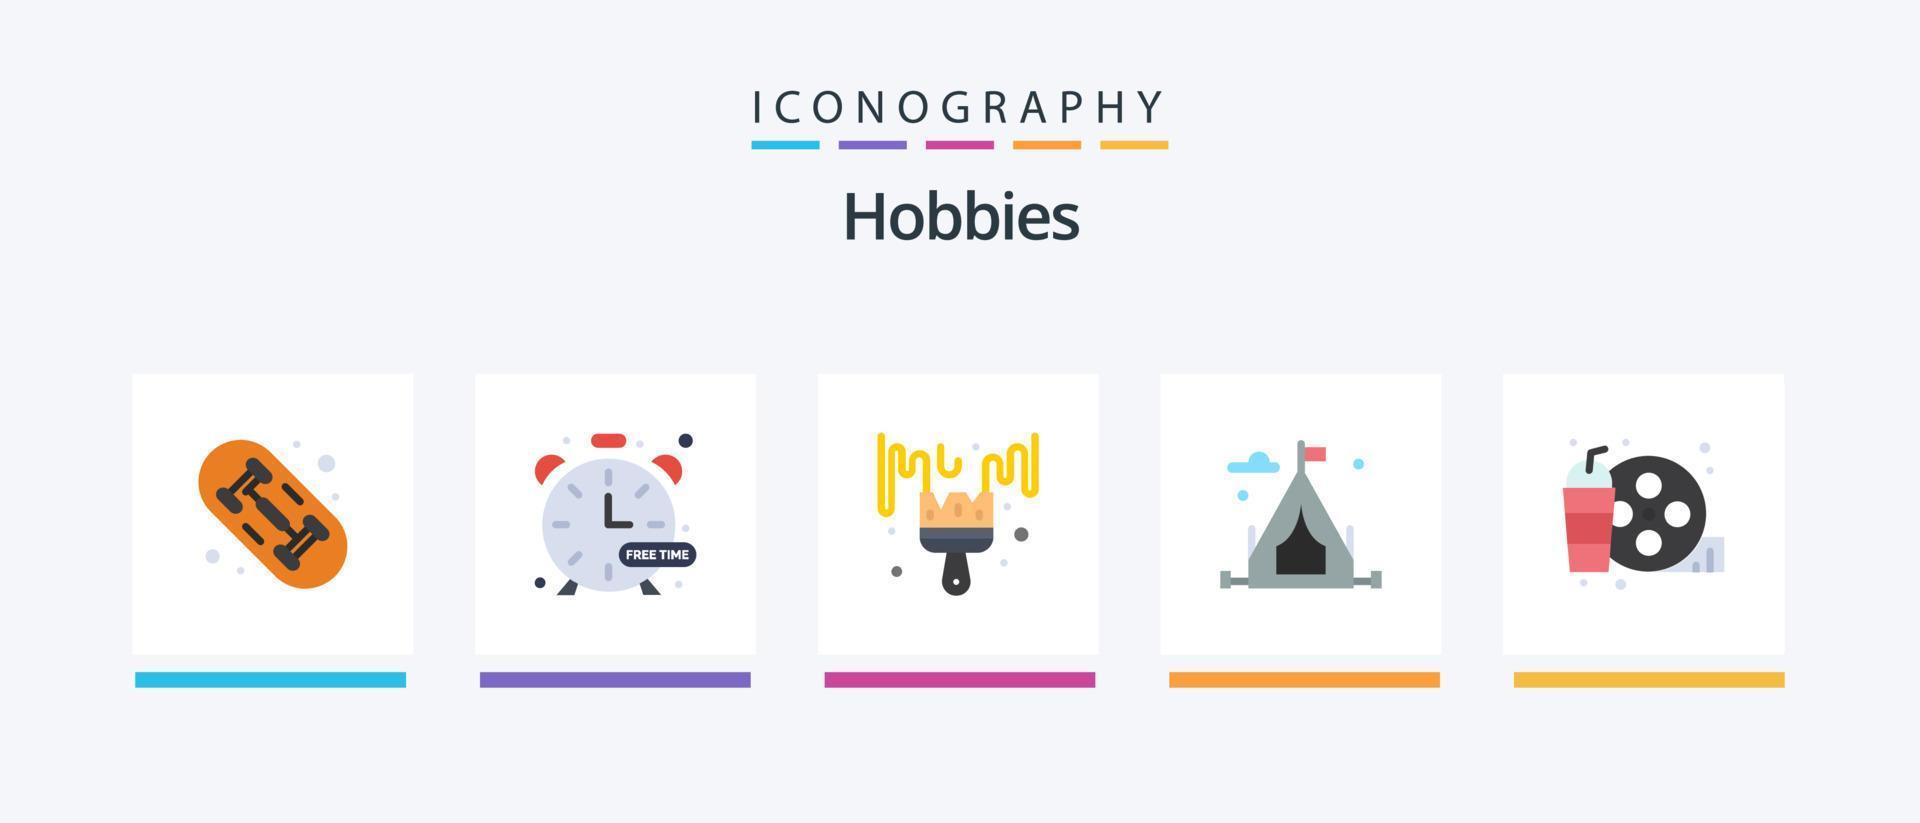 Hobbies Flat 5 Icon Pack Including hobby. drink. color. real. hobbies. Creative Icons Design vector